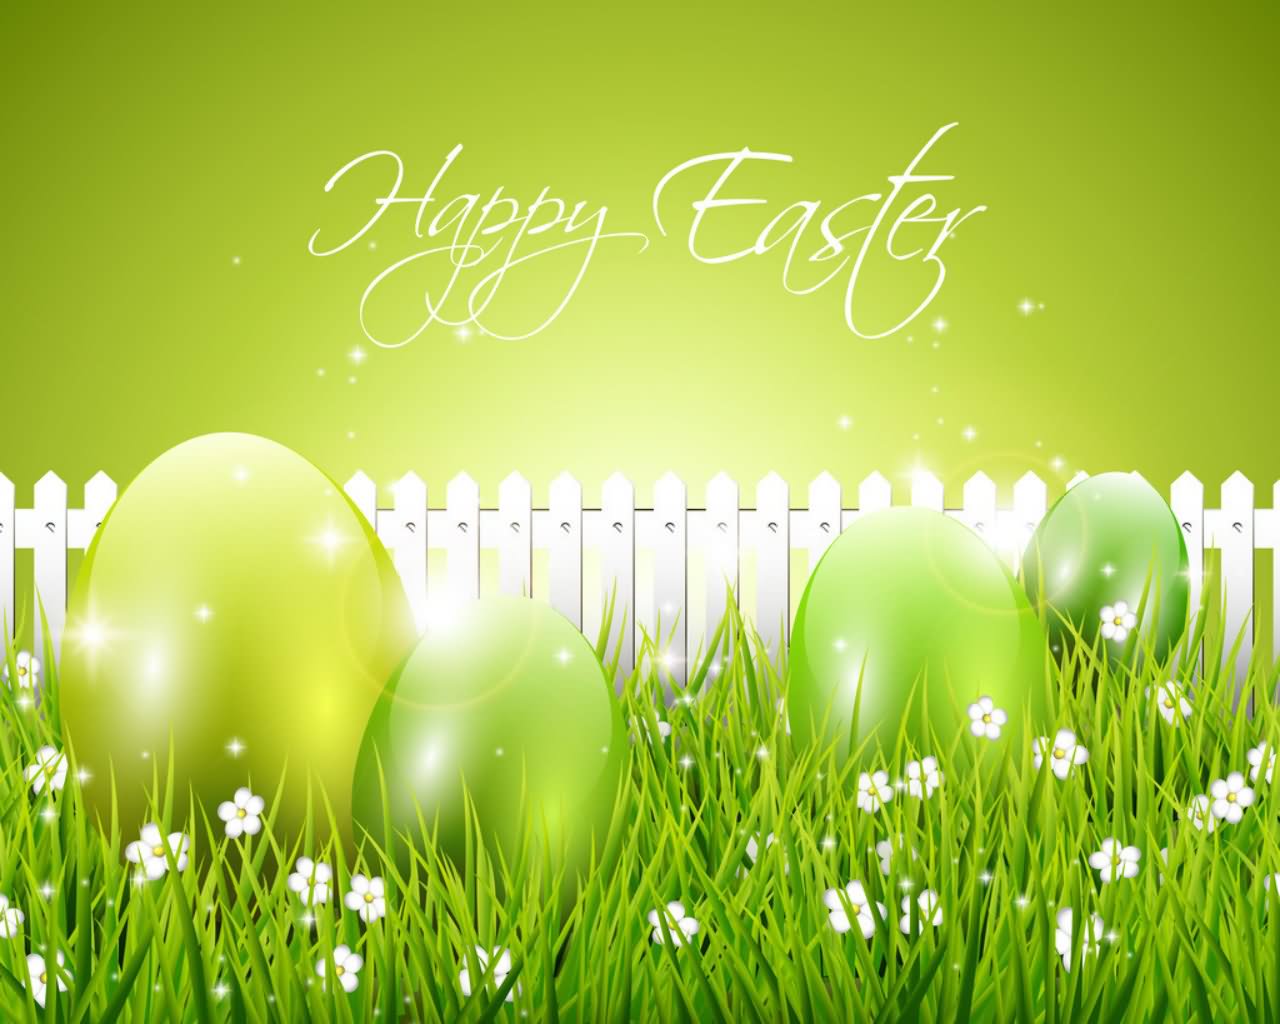 Happy Easter To All My Friends